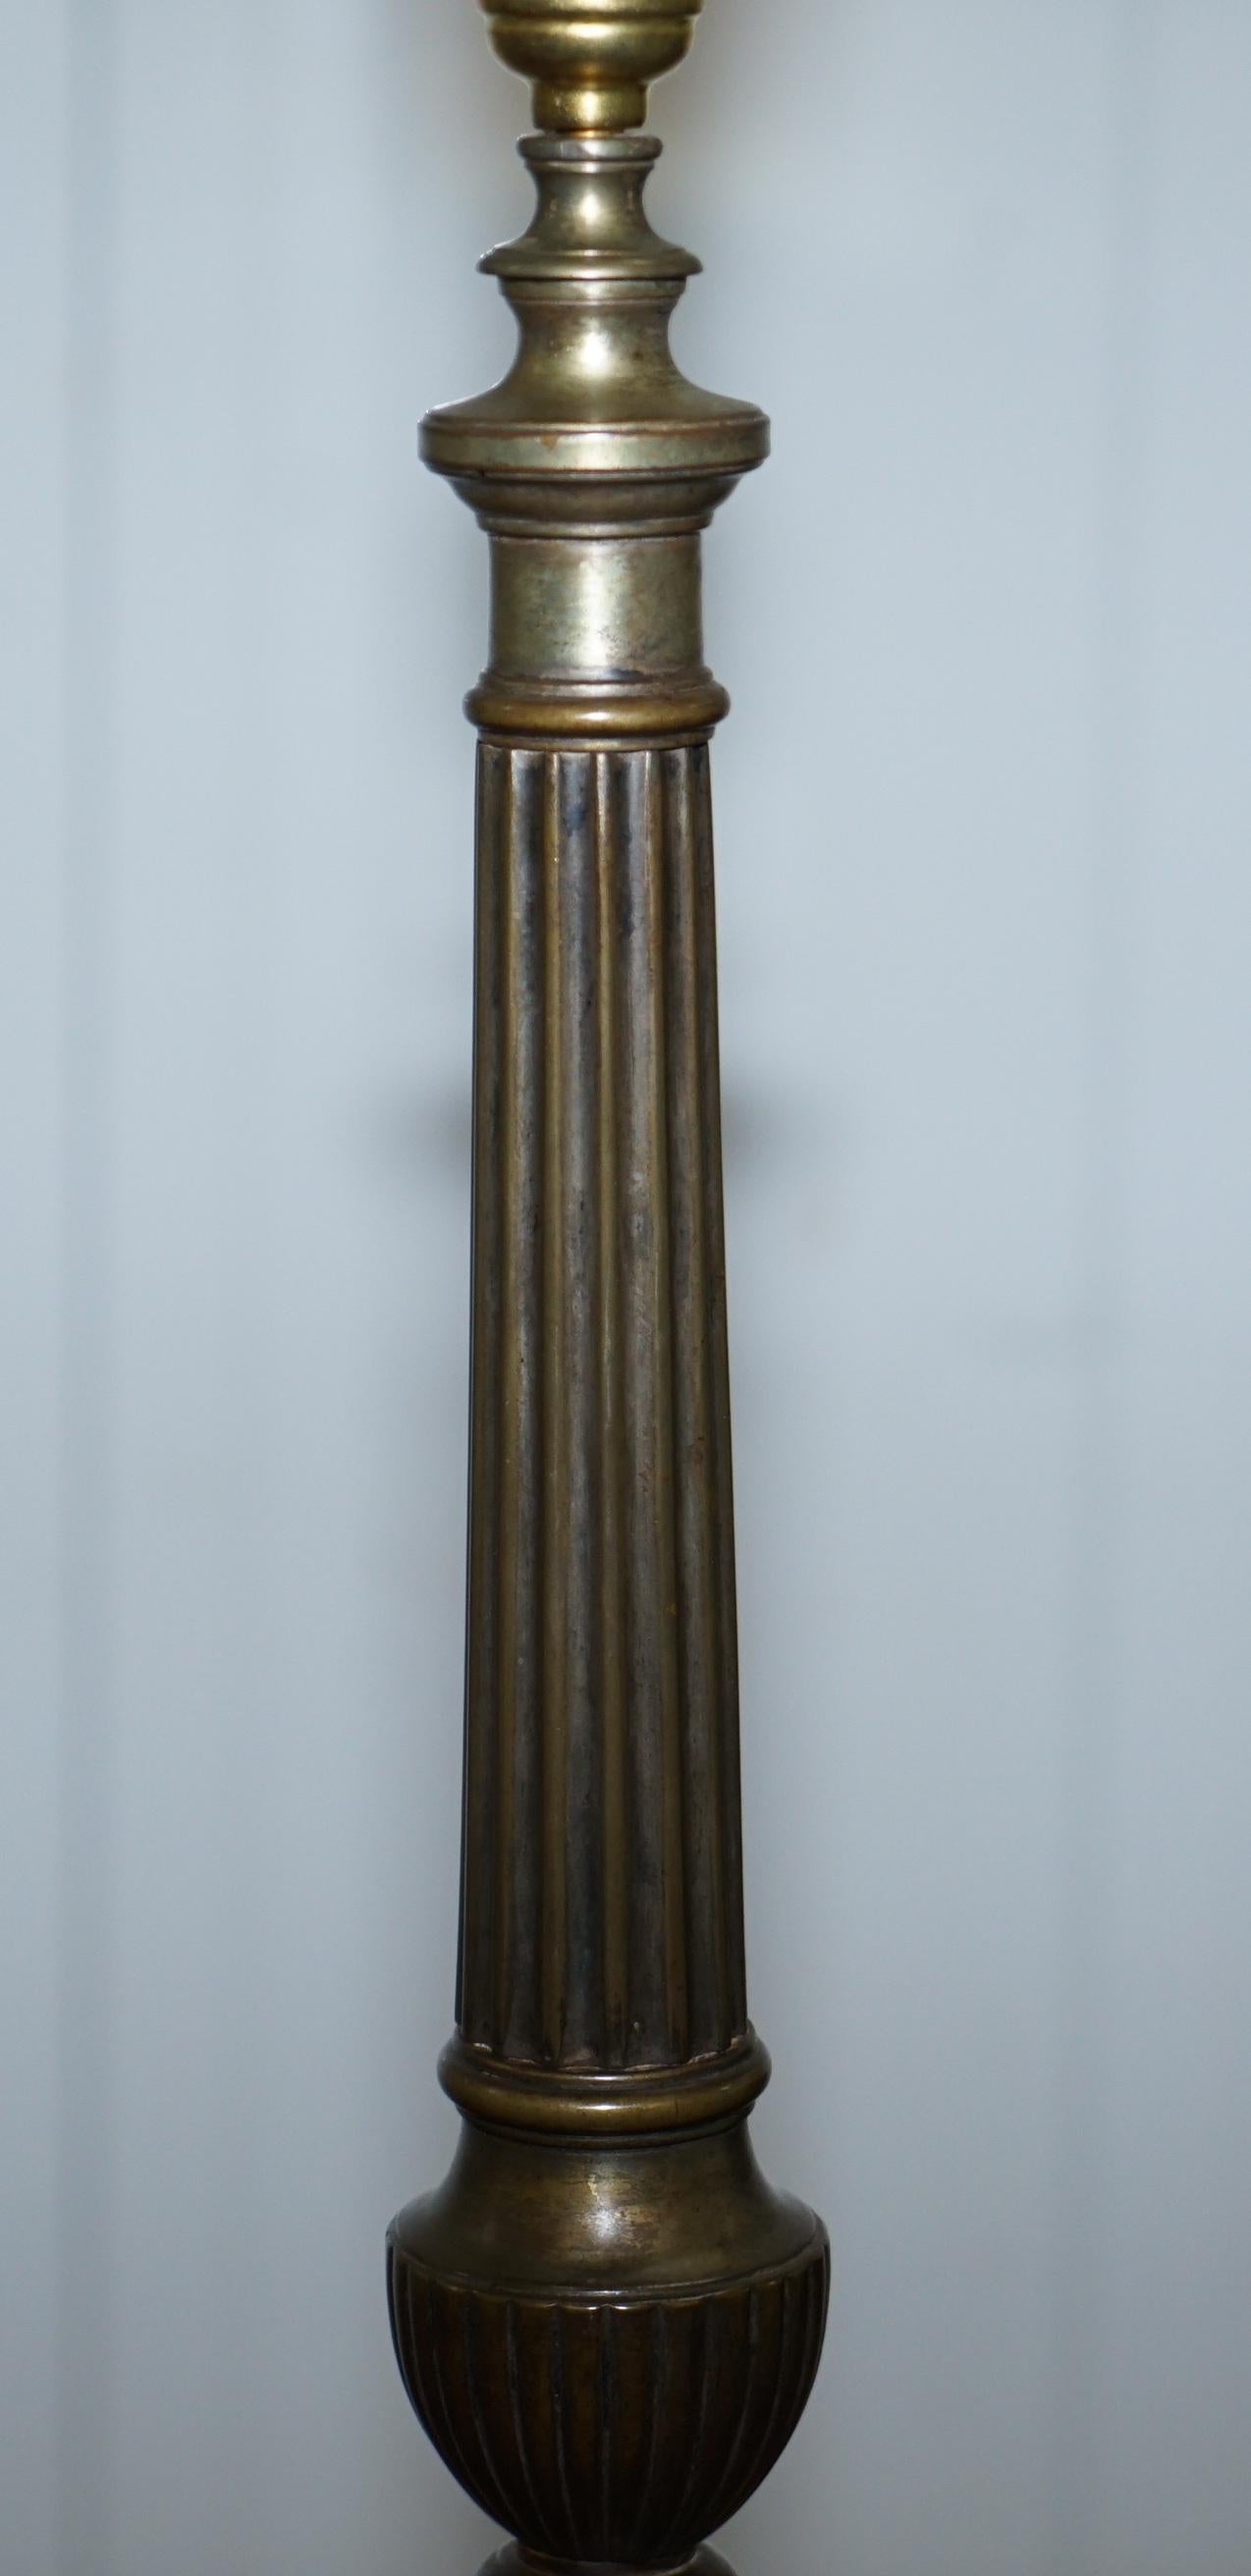 Lovely Bronze circa 1900 Corinthian Pillar Lamp Serviced Rewired and Ready to Go 6